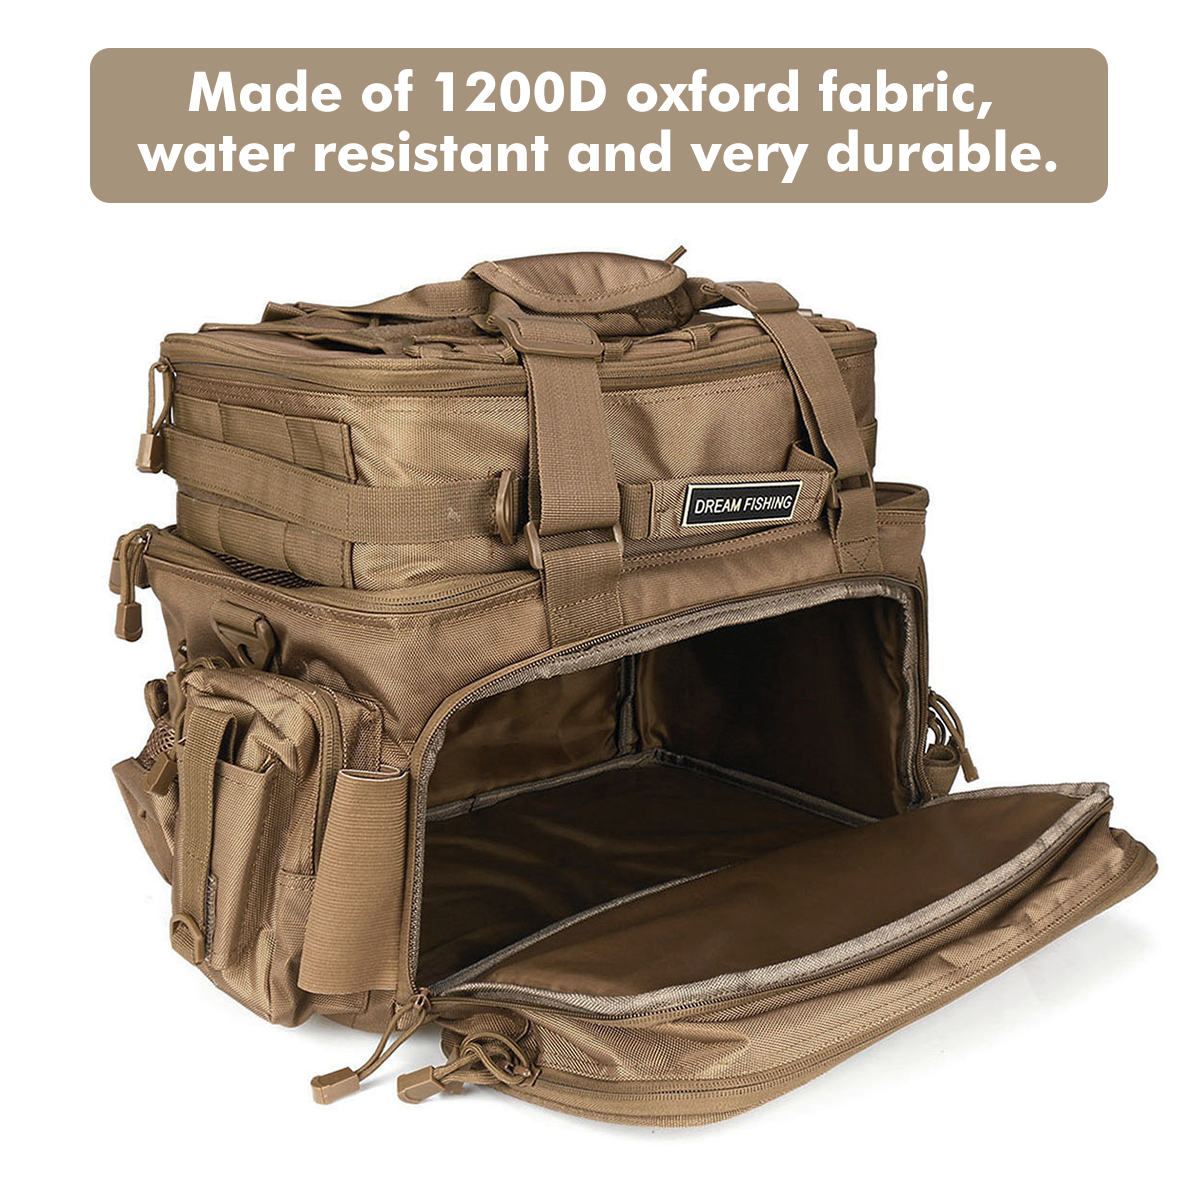 Zanlure-1200D-Oxford-Fishing-Bag-Waterproof-Storage-Backpack-Handbag-With-Lure-Boxes-1632483-4